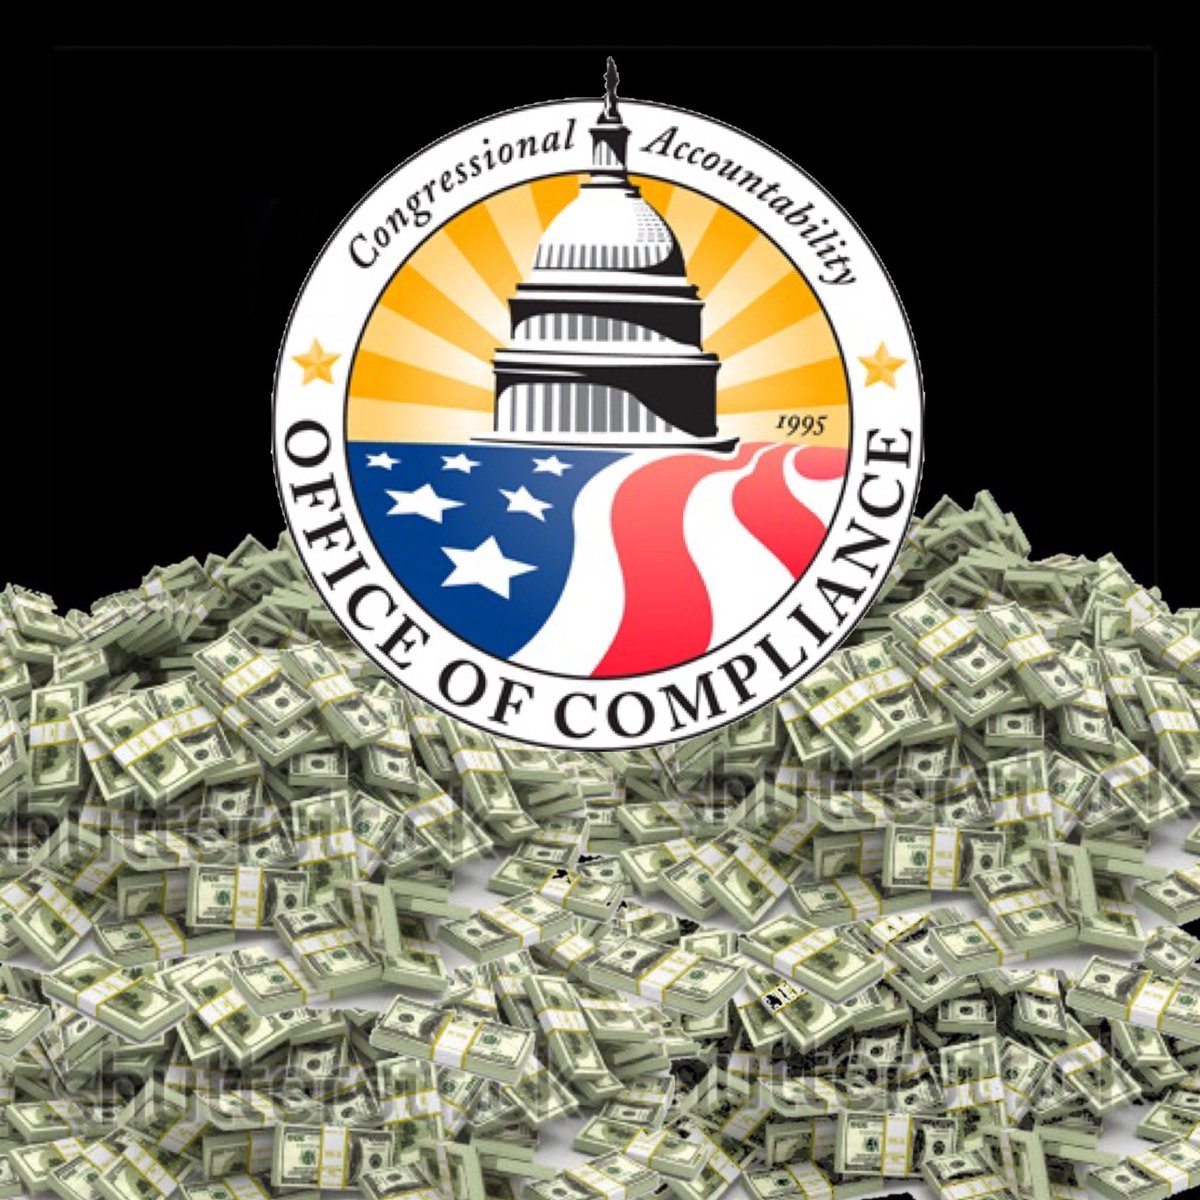 The Federal Office of Compliance has paid out $17 million, of taxpayer money, to 248 accusers of sexual misconduct by members of Congress (Hush $$$). With President Trump on trial for allegedly paying “Hush Money” to a porn actress based on the word of a convicted lying ex-con,…